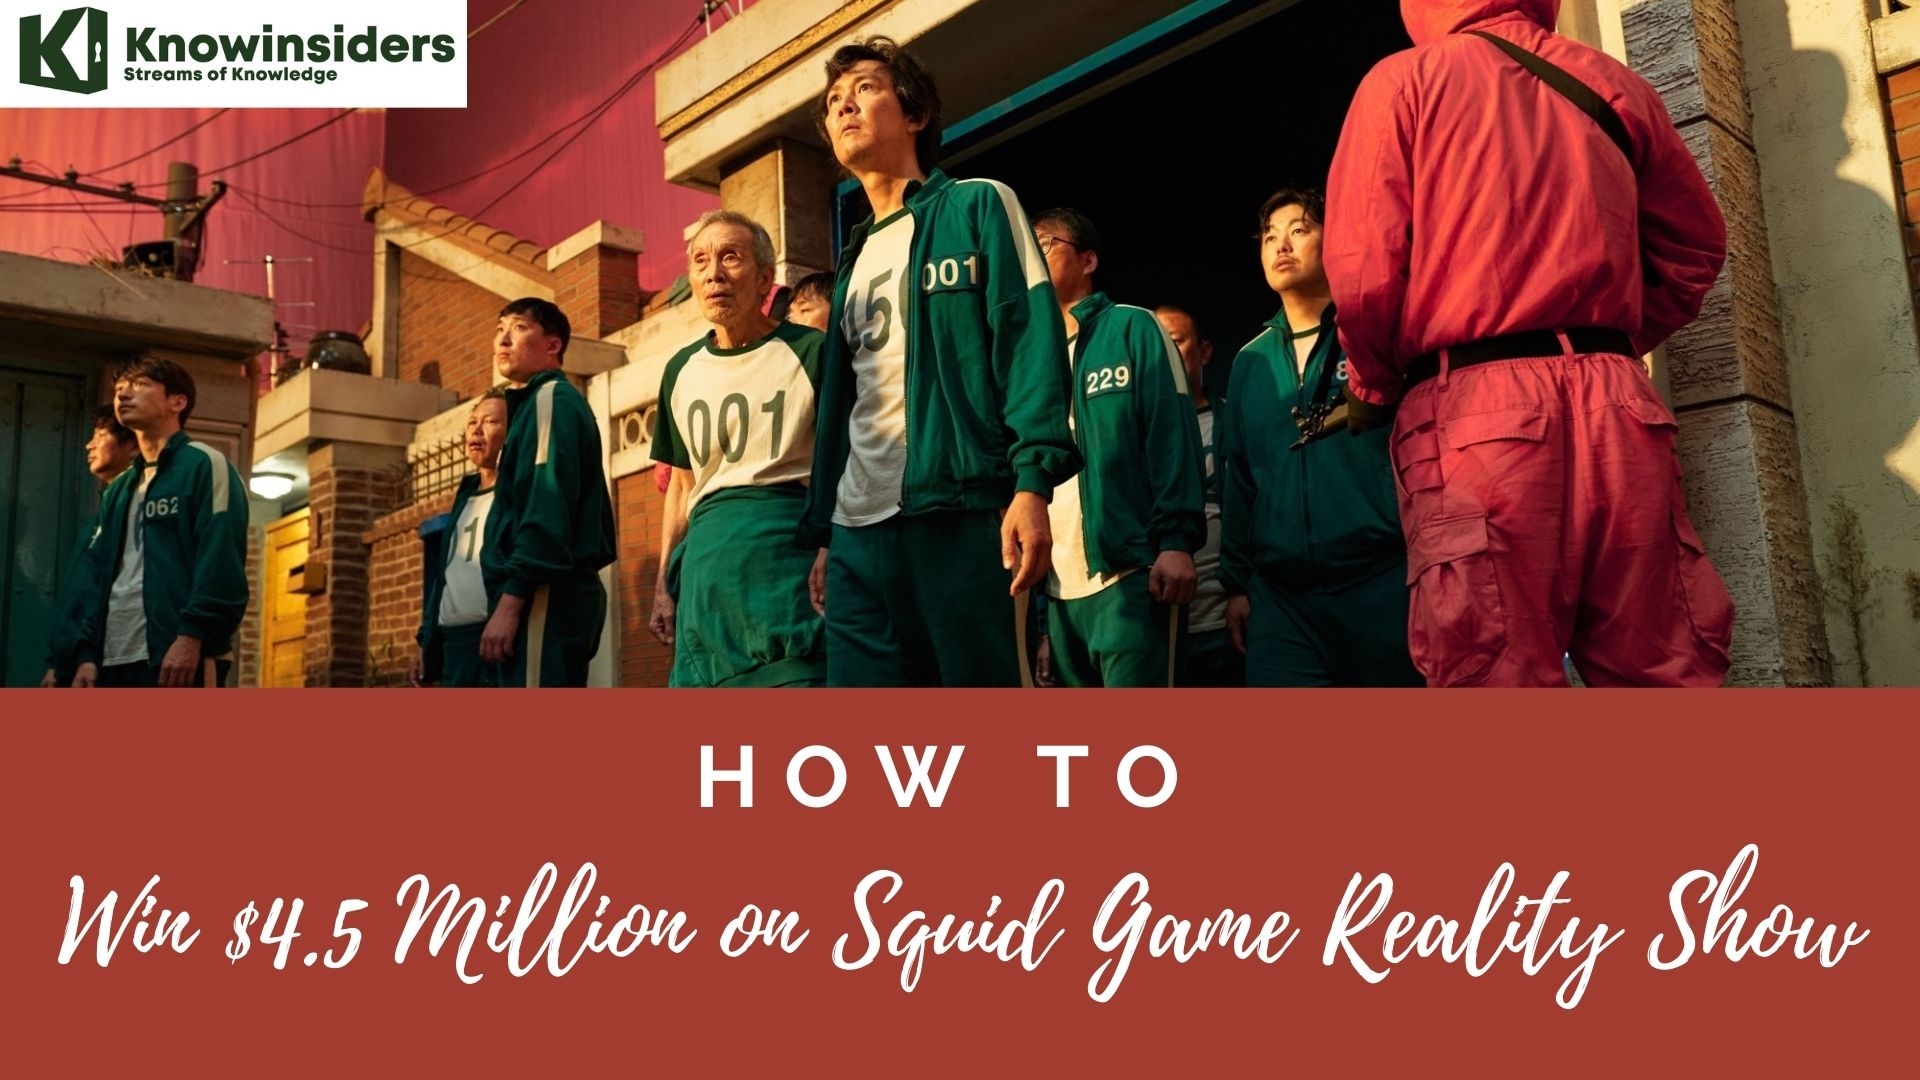 How to Win $4.5 Million on Squid Game Reality Show: Simple Steps 